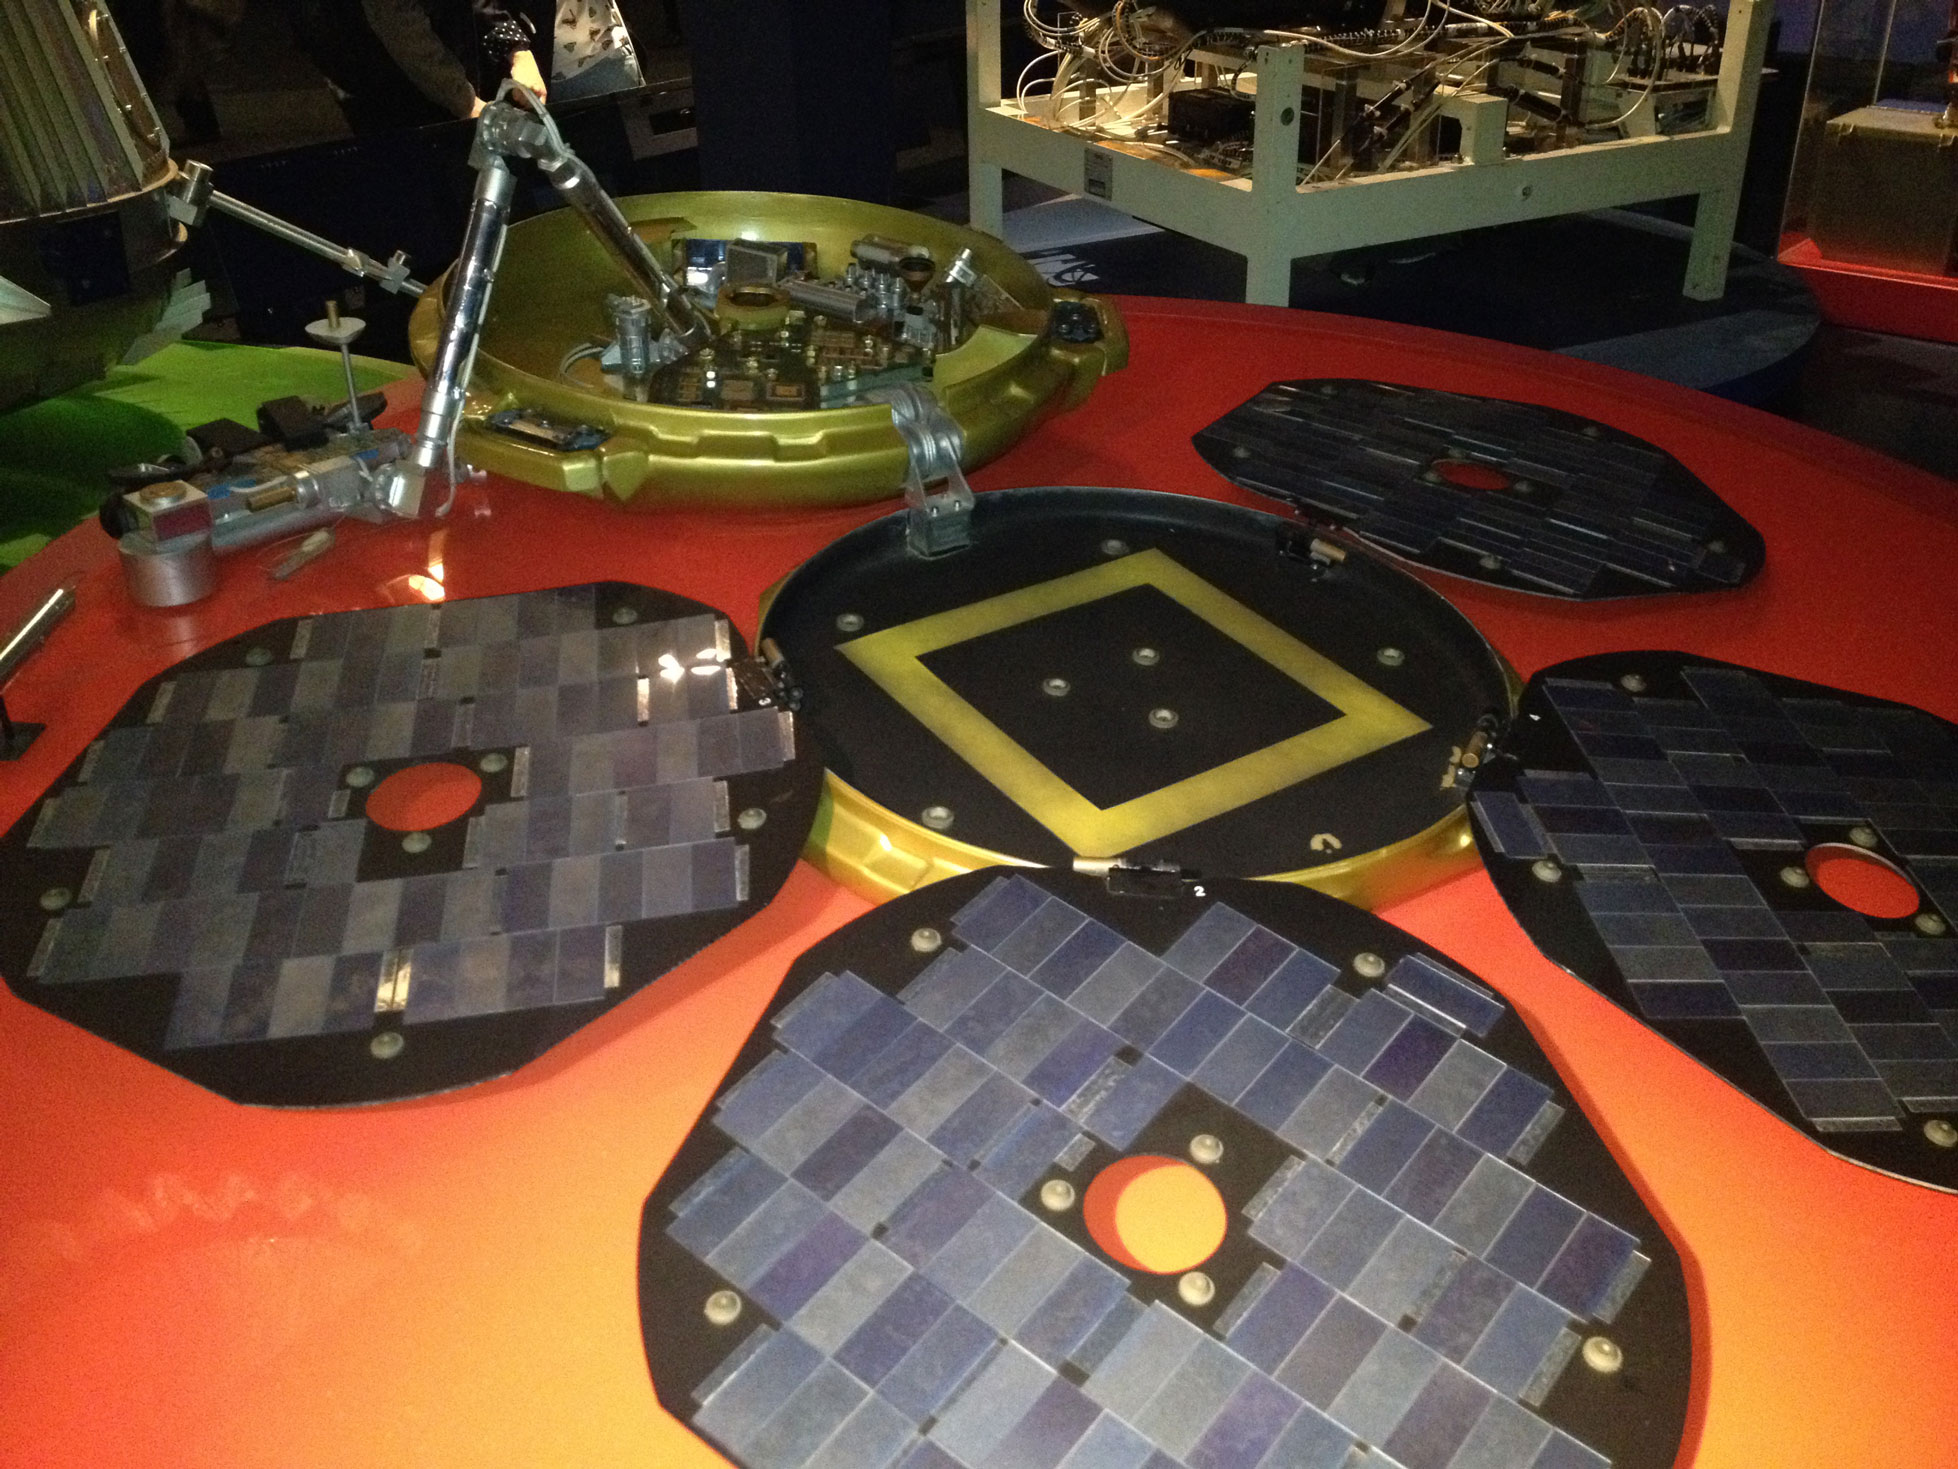 A model of the Beagle 2 Mars lander, on display in the Science Museum.